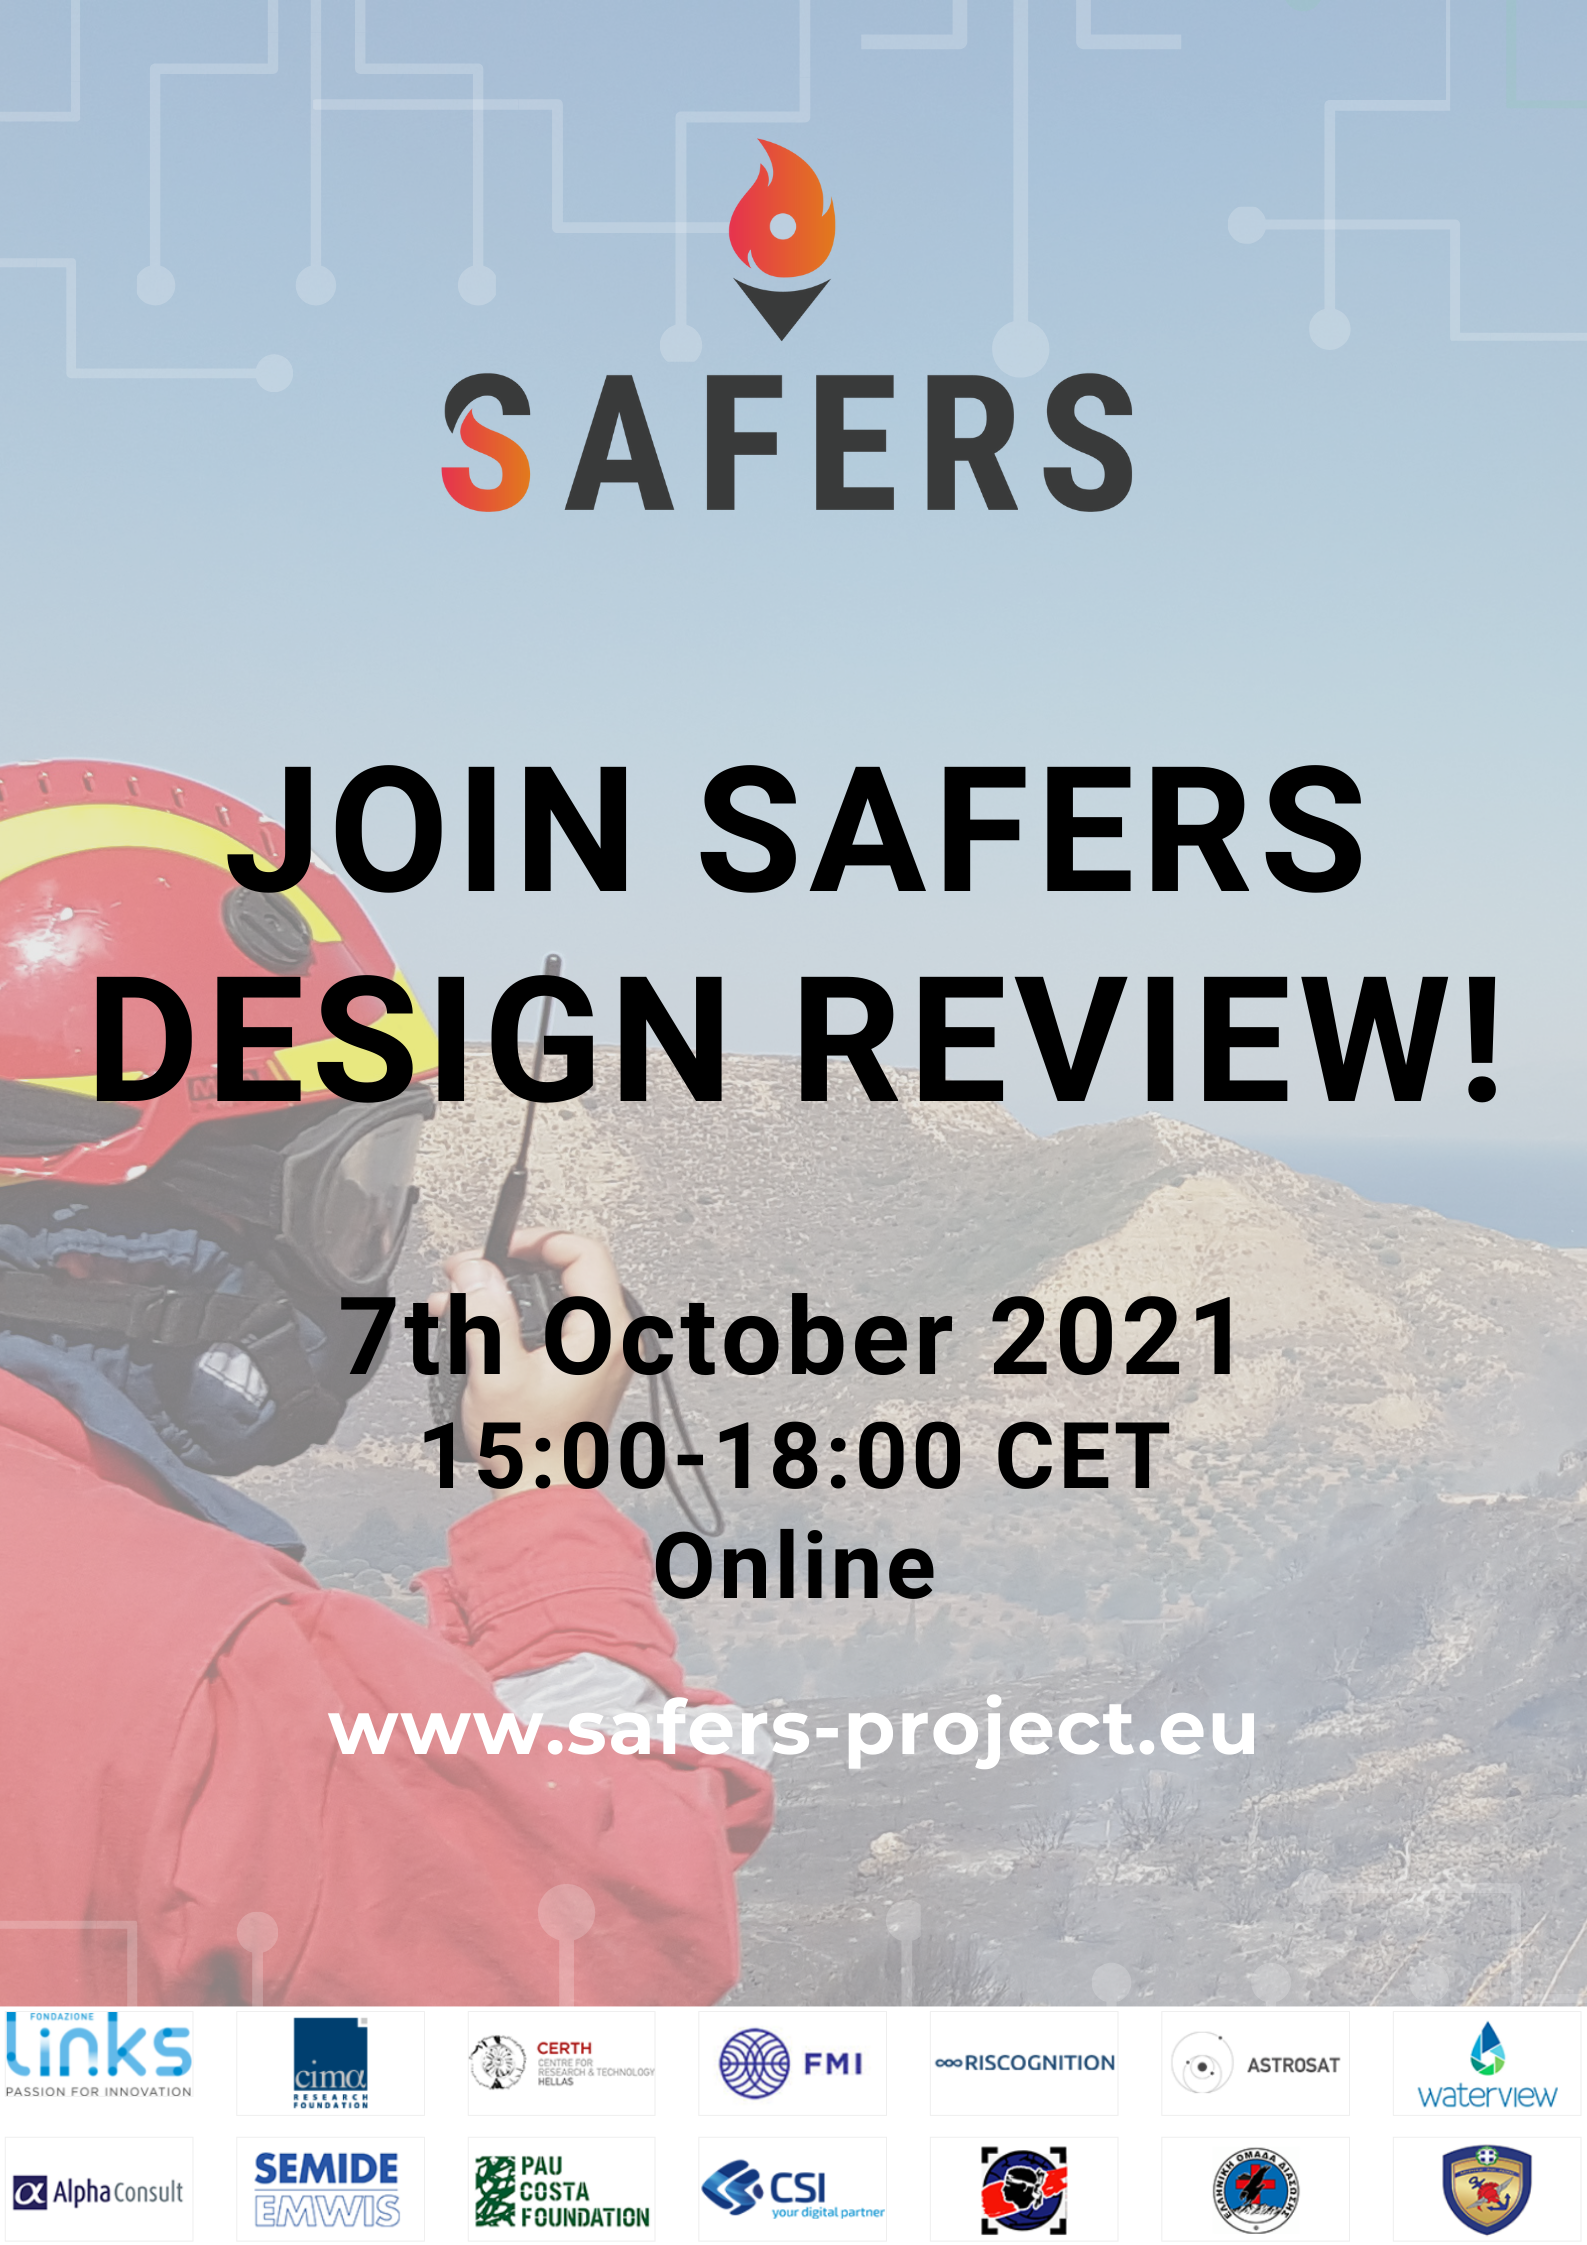 Join SAFERS Design Review on 7 October 2021!